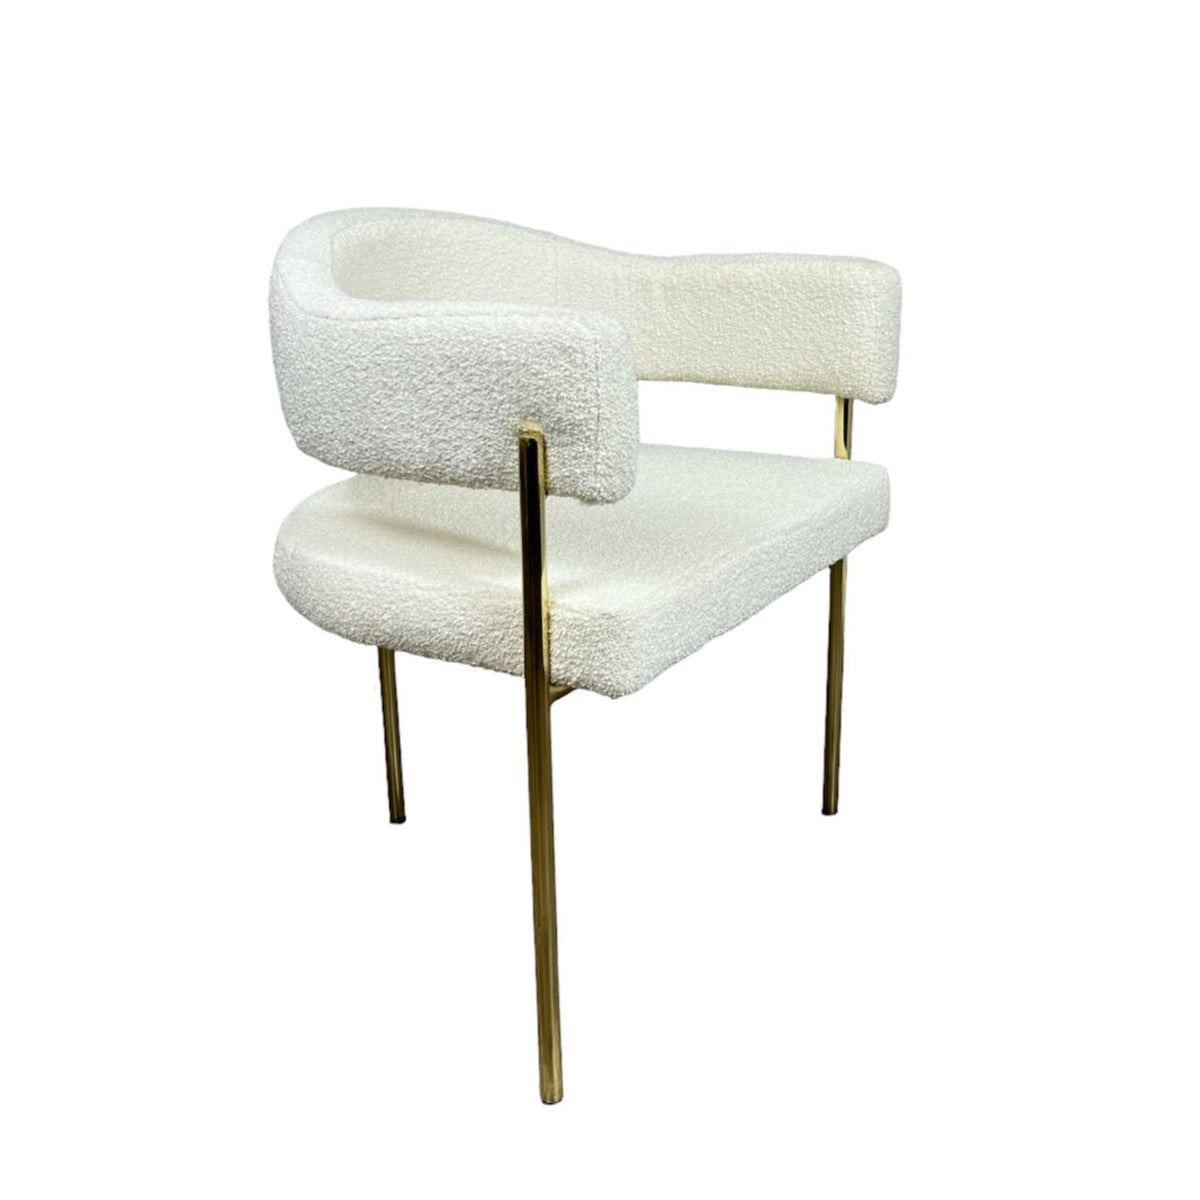 Kijova dining and accent cream large chair